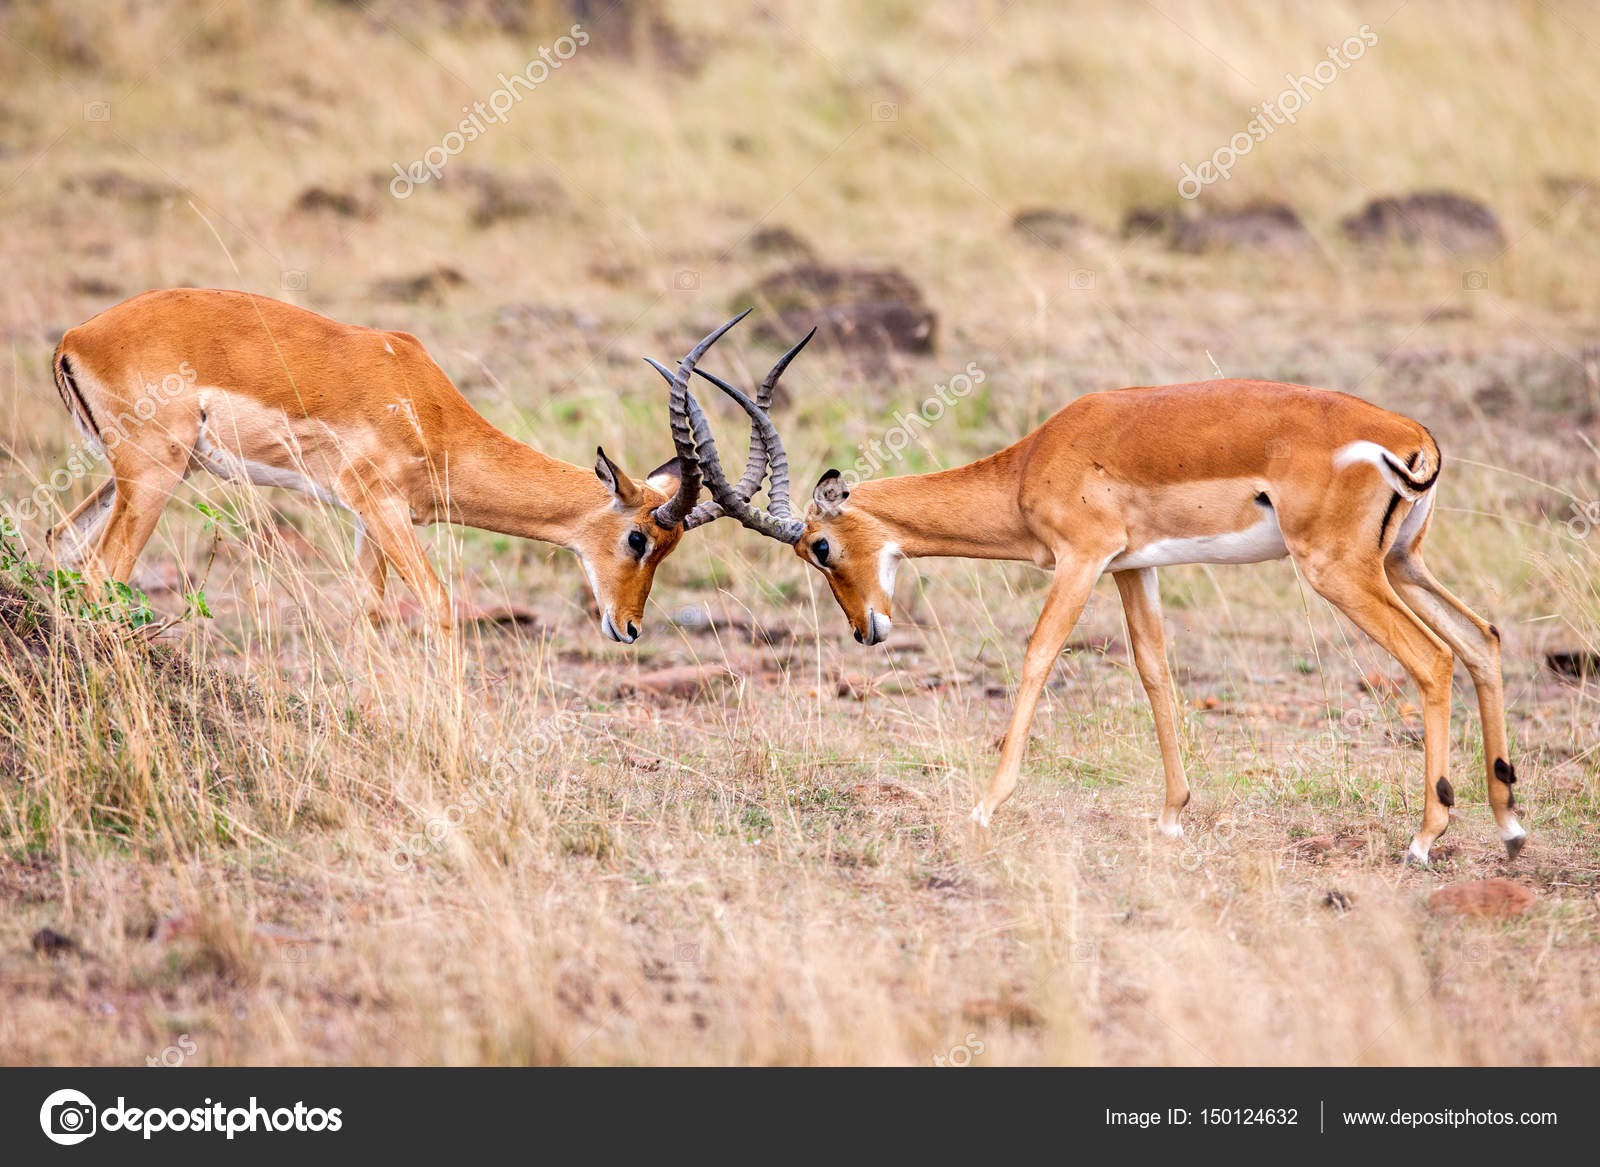 Two Male Impala Fight In For The Herd With Best Territory Stock Photo C Sichkarenko Com 150124632